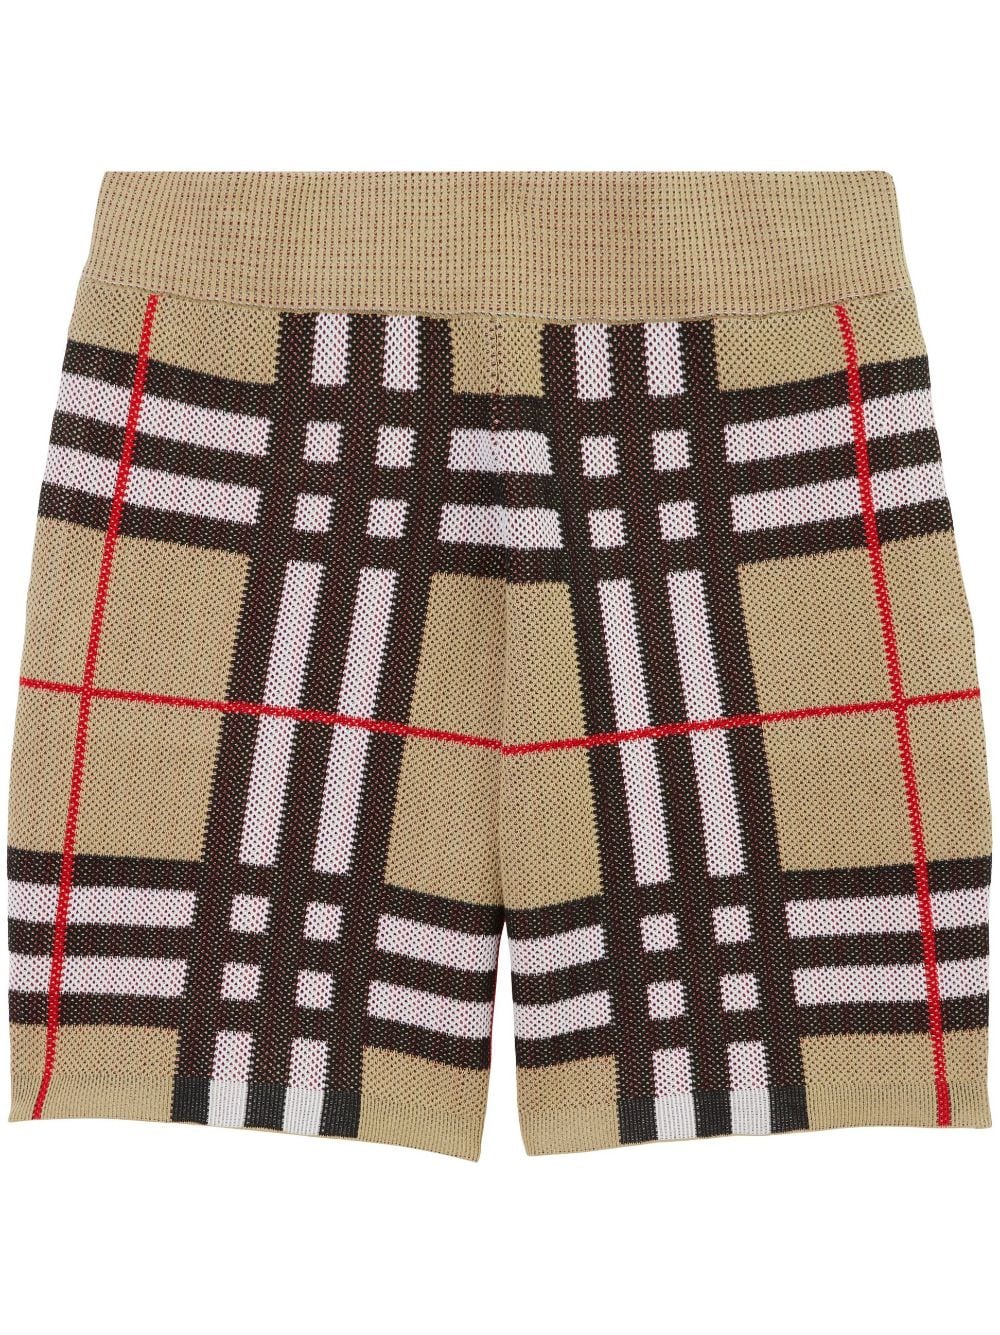 BURBERRY CHECK TECHNICAL SHORTS